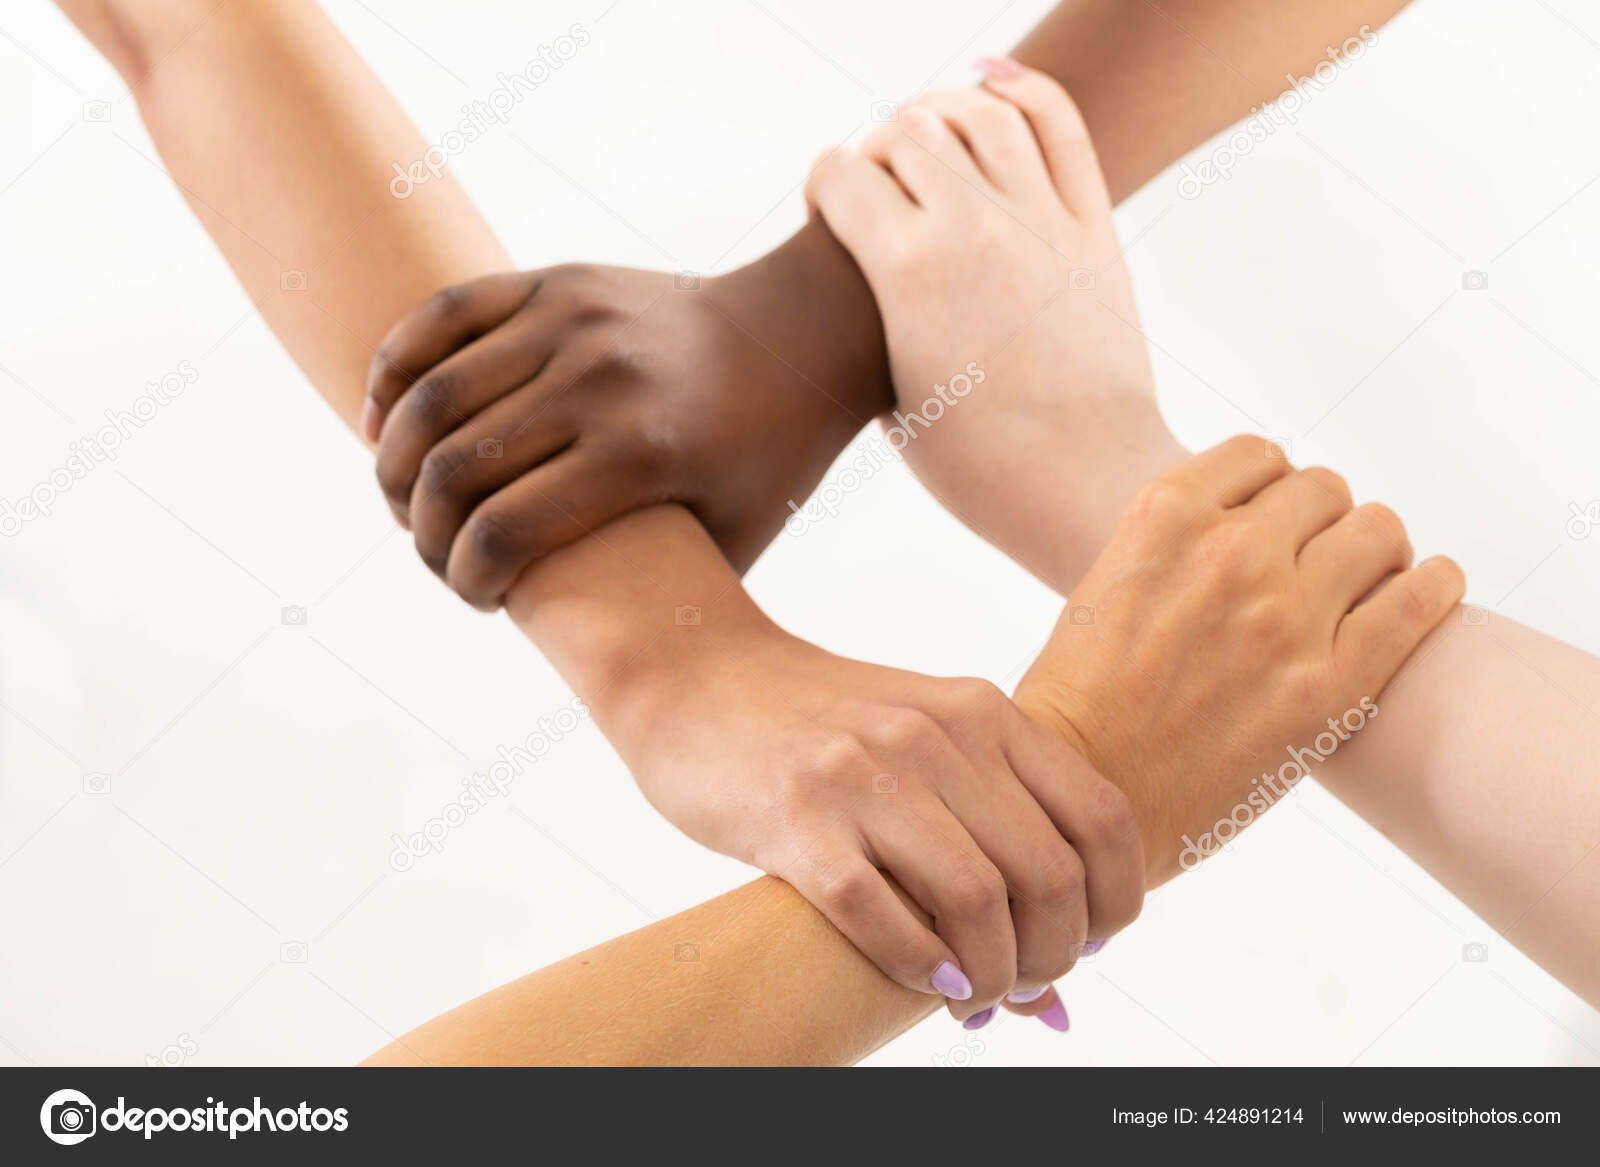 Each of the four hands is clasped around the friends wrist. One